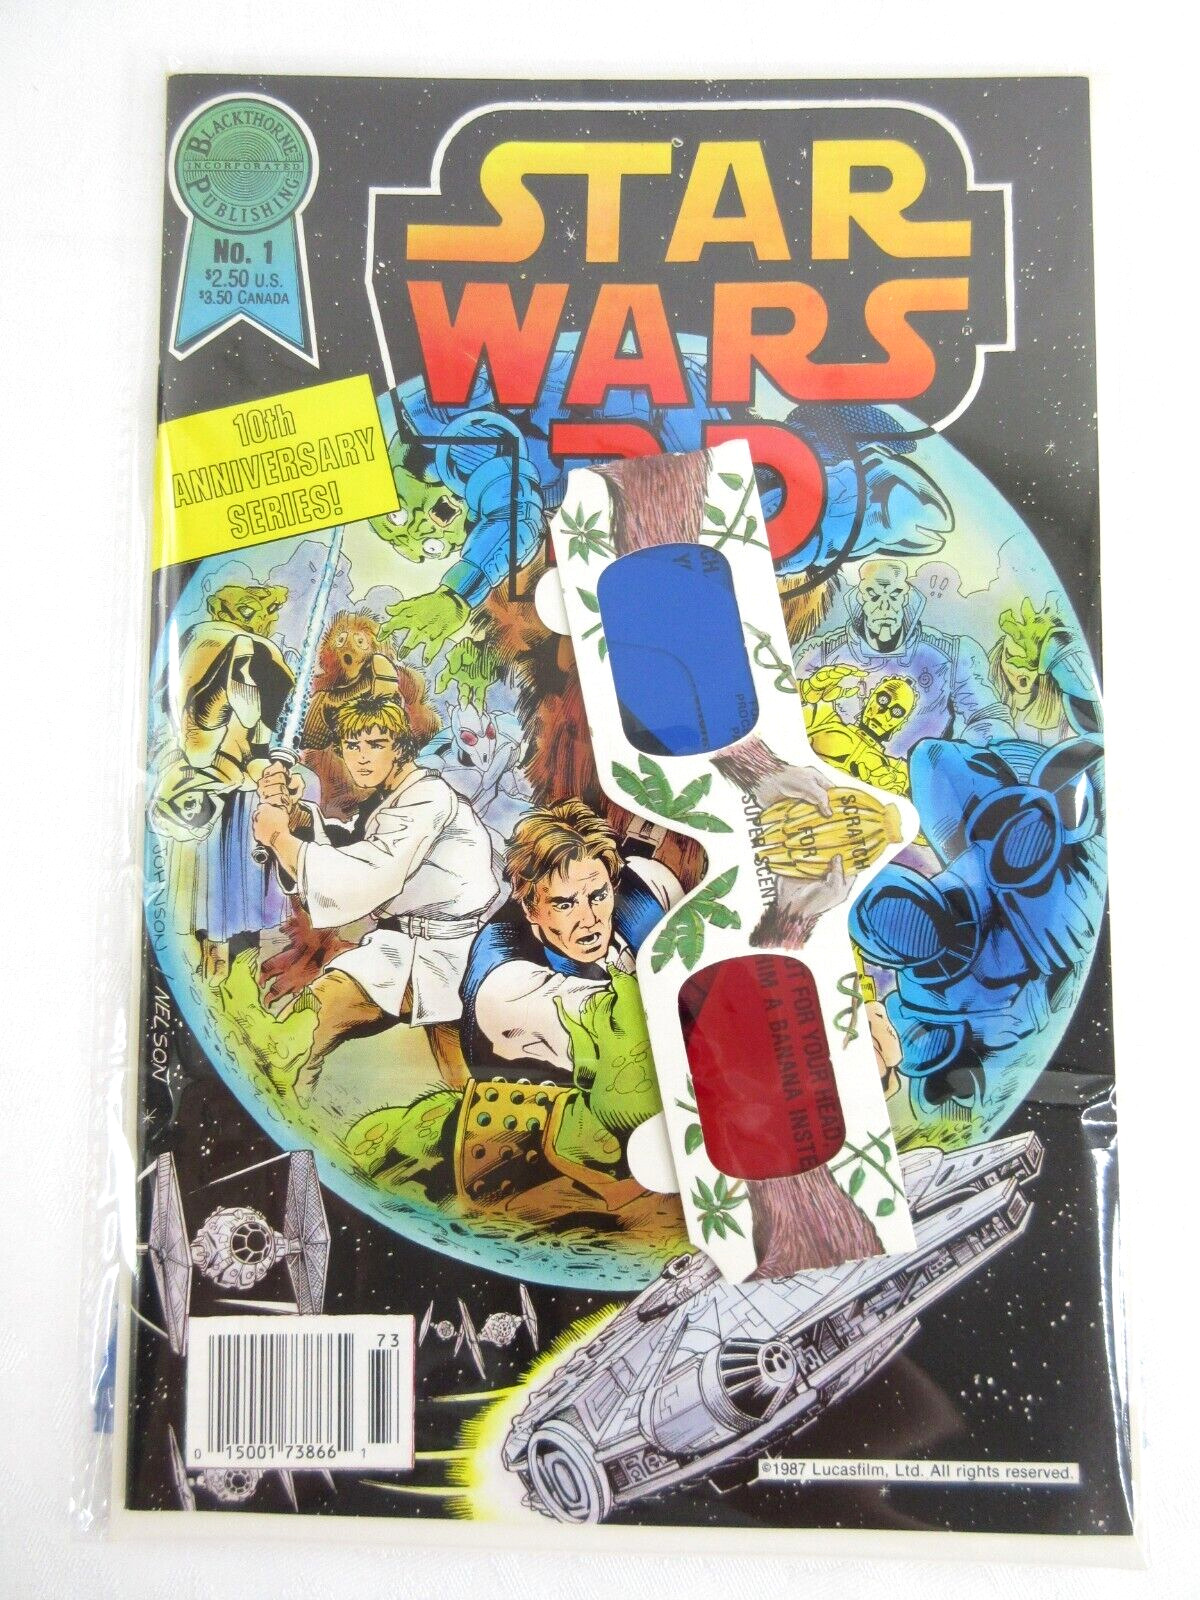 Star Wars 3D #1 Blackthorne Publishing 1987 with Glasses 10th Anniversary EXCEL